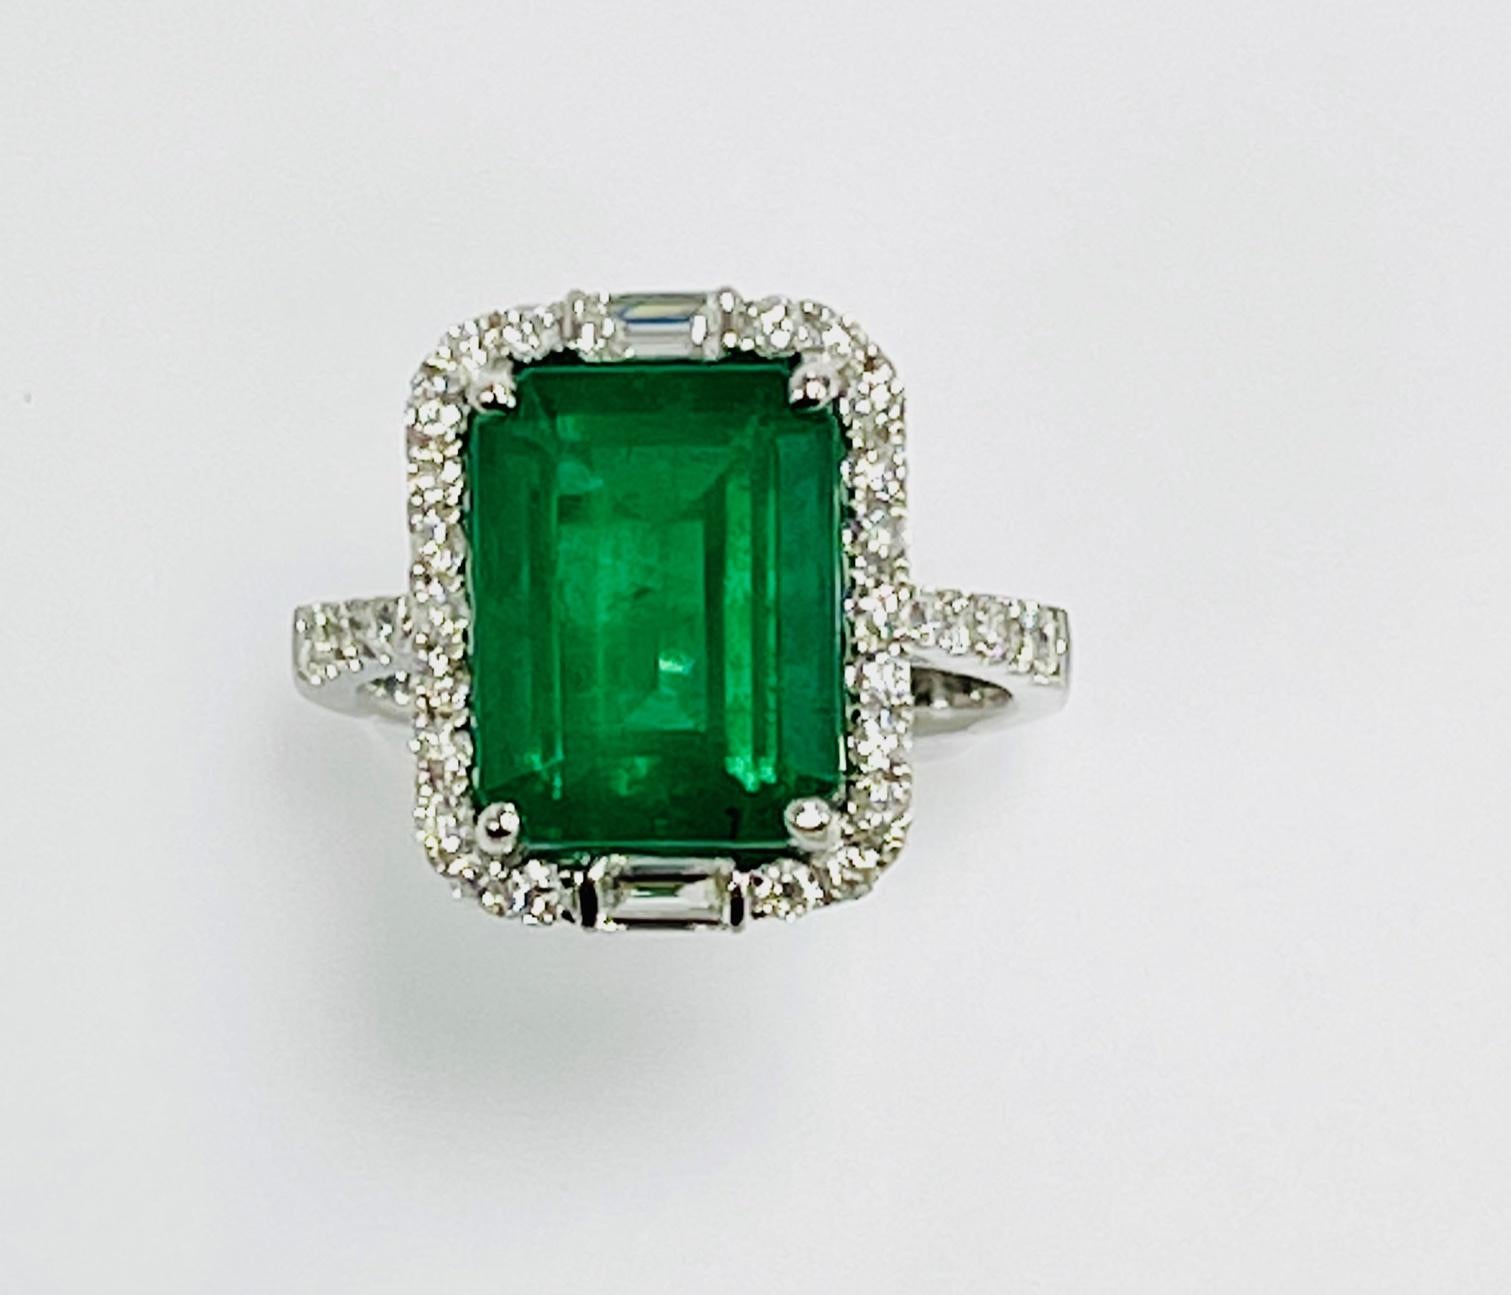 4.72 Carat Zambian emerald cut emerald set in 18k white gold ring with 0.84 Carat round and baguette diamond around it andhalf way on the shank..